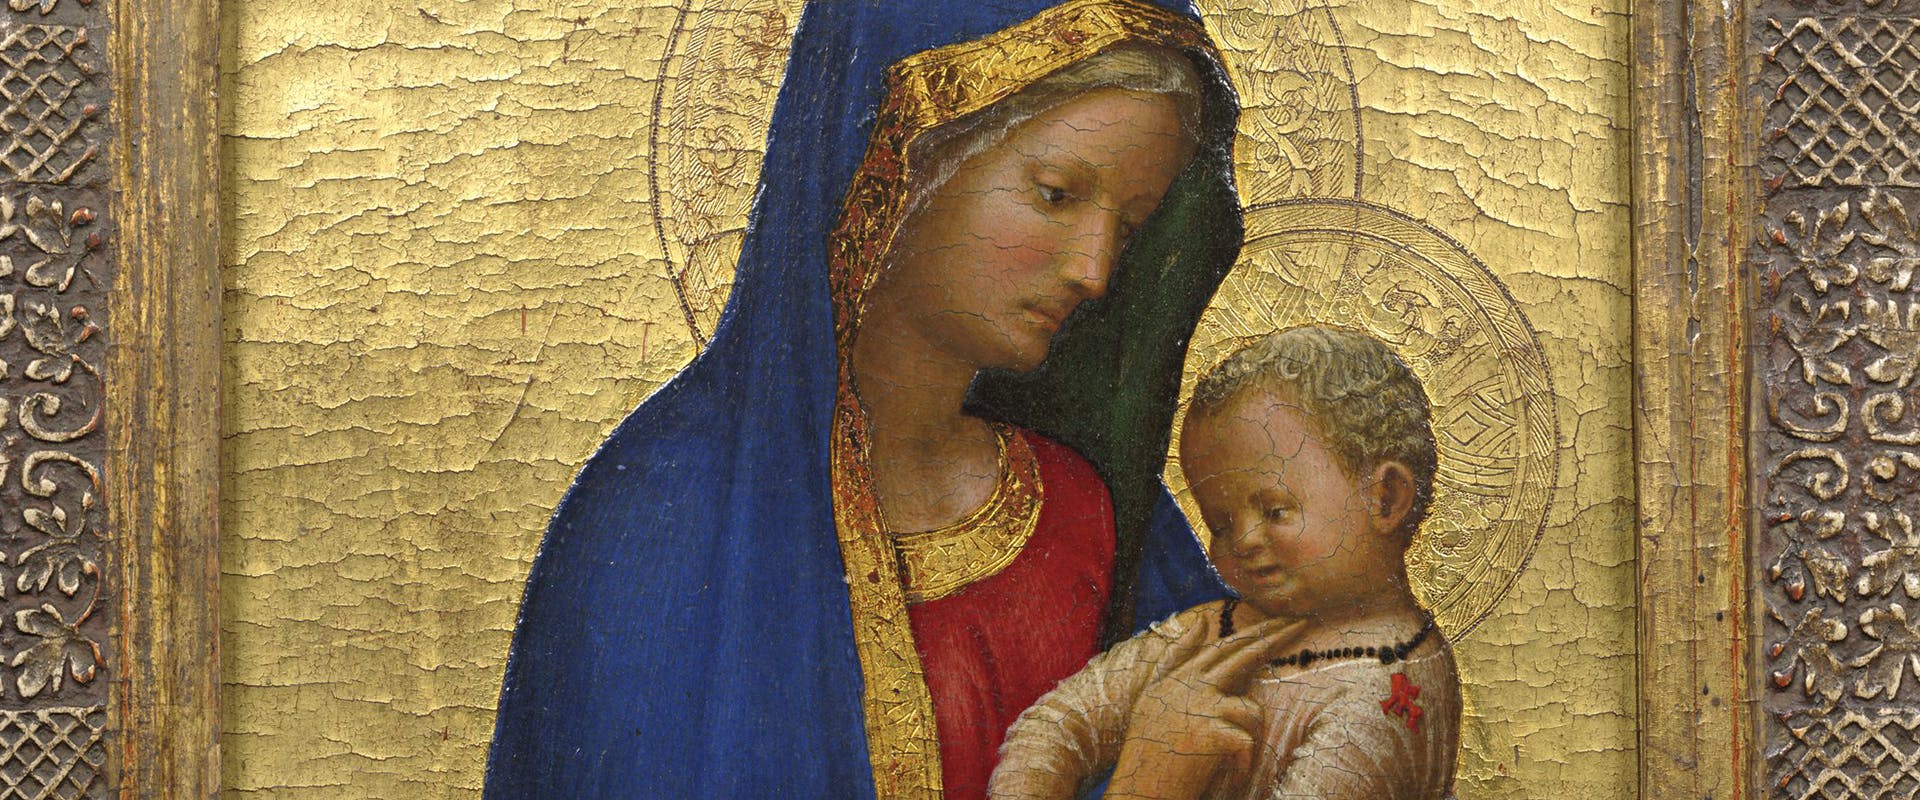 Masaccio and Fra Angelico. A dialogue on truth in painting